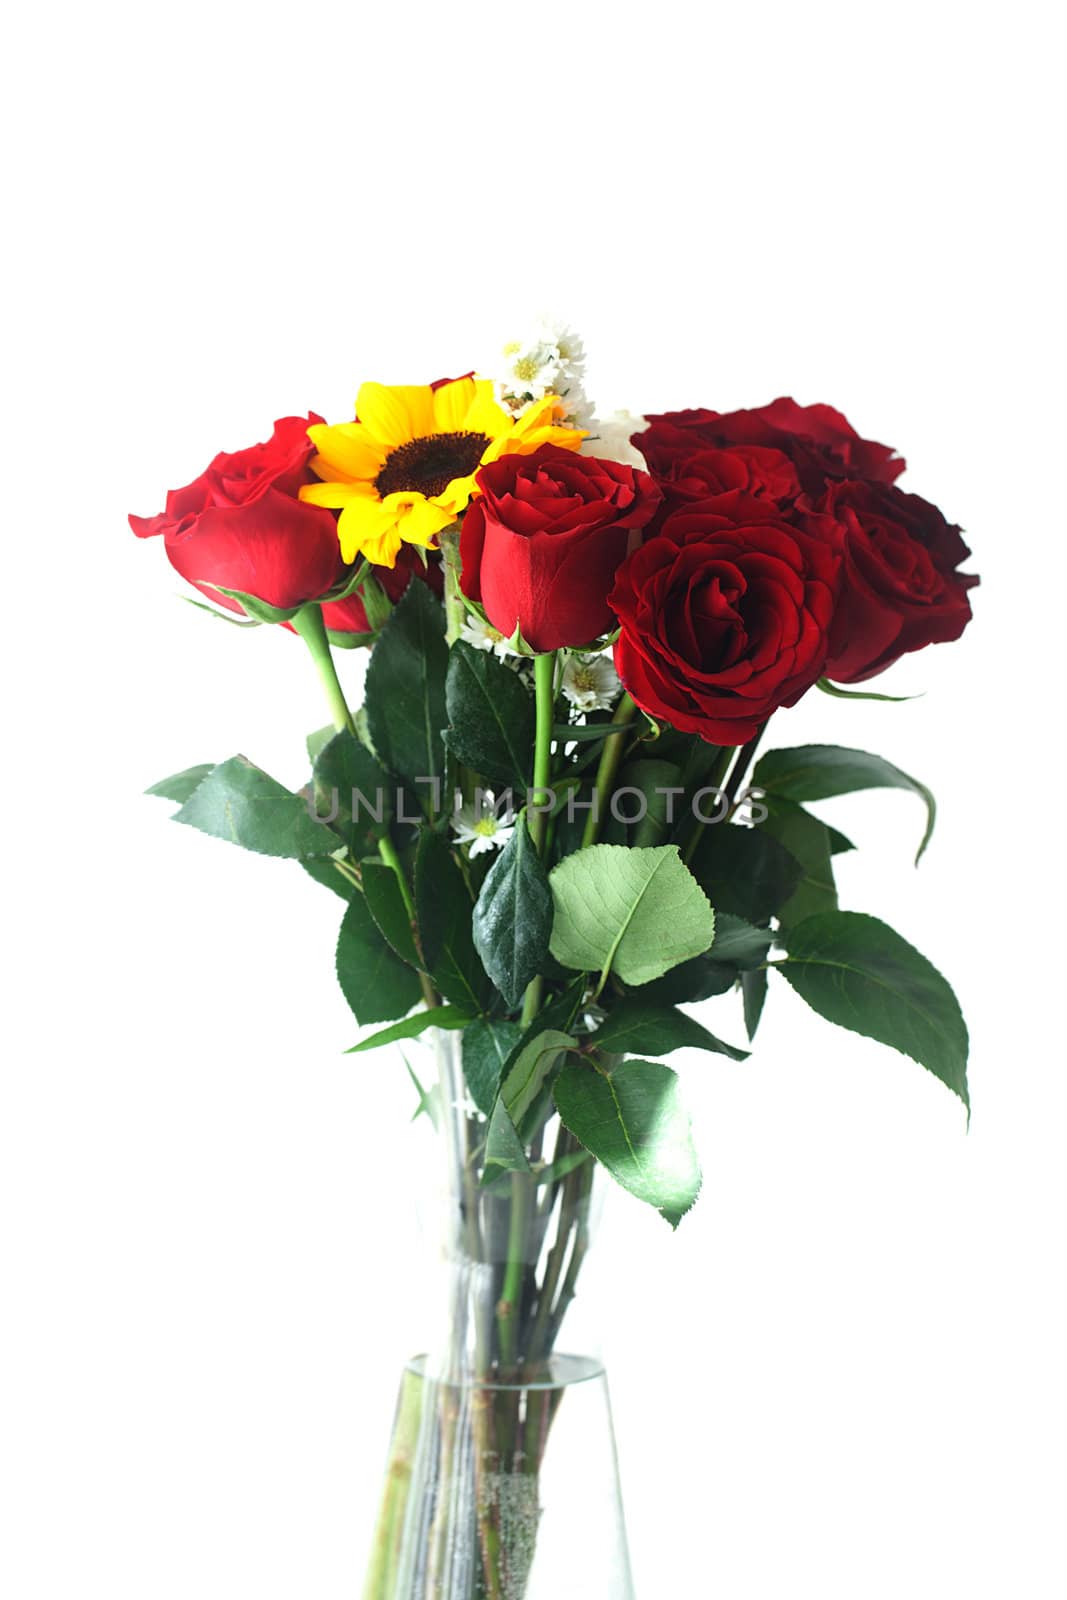 bouquet of red roses and sunflowers